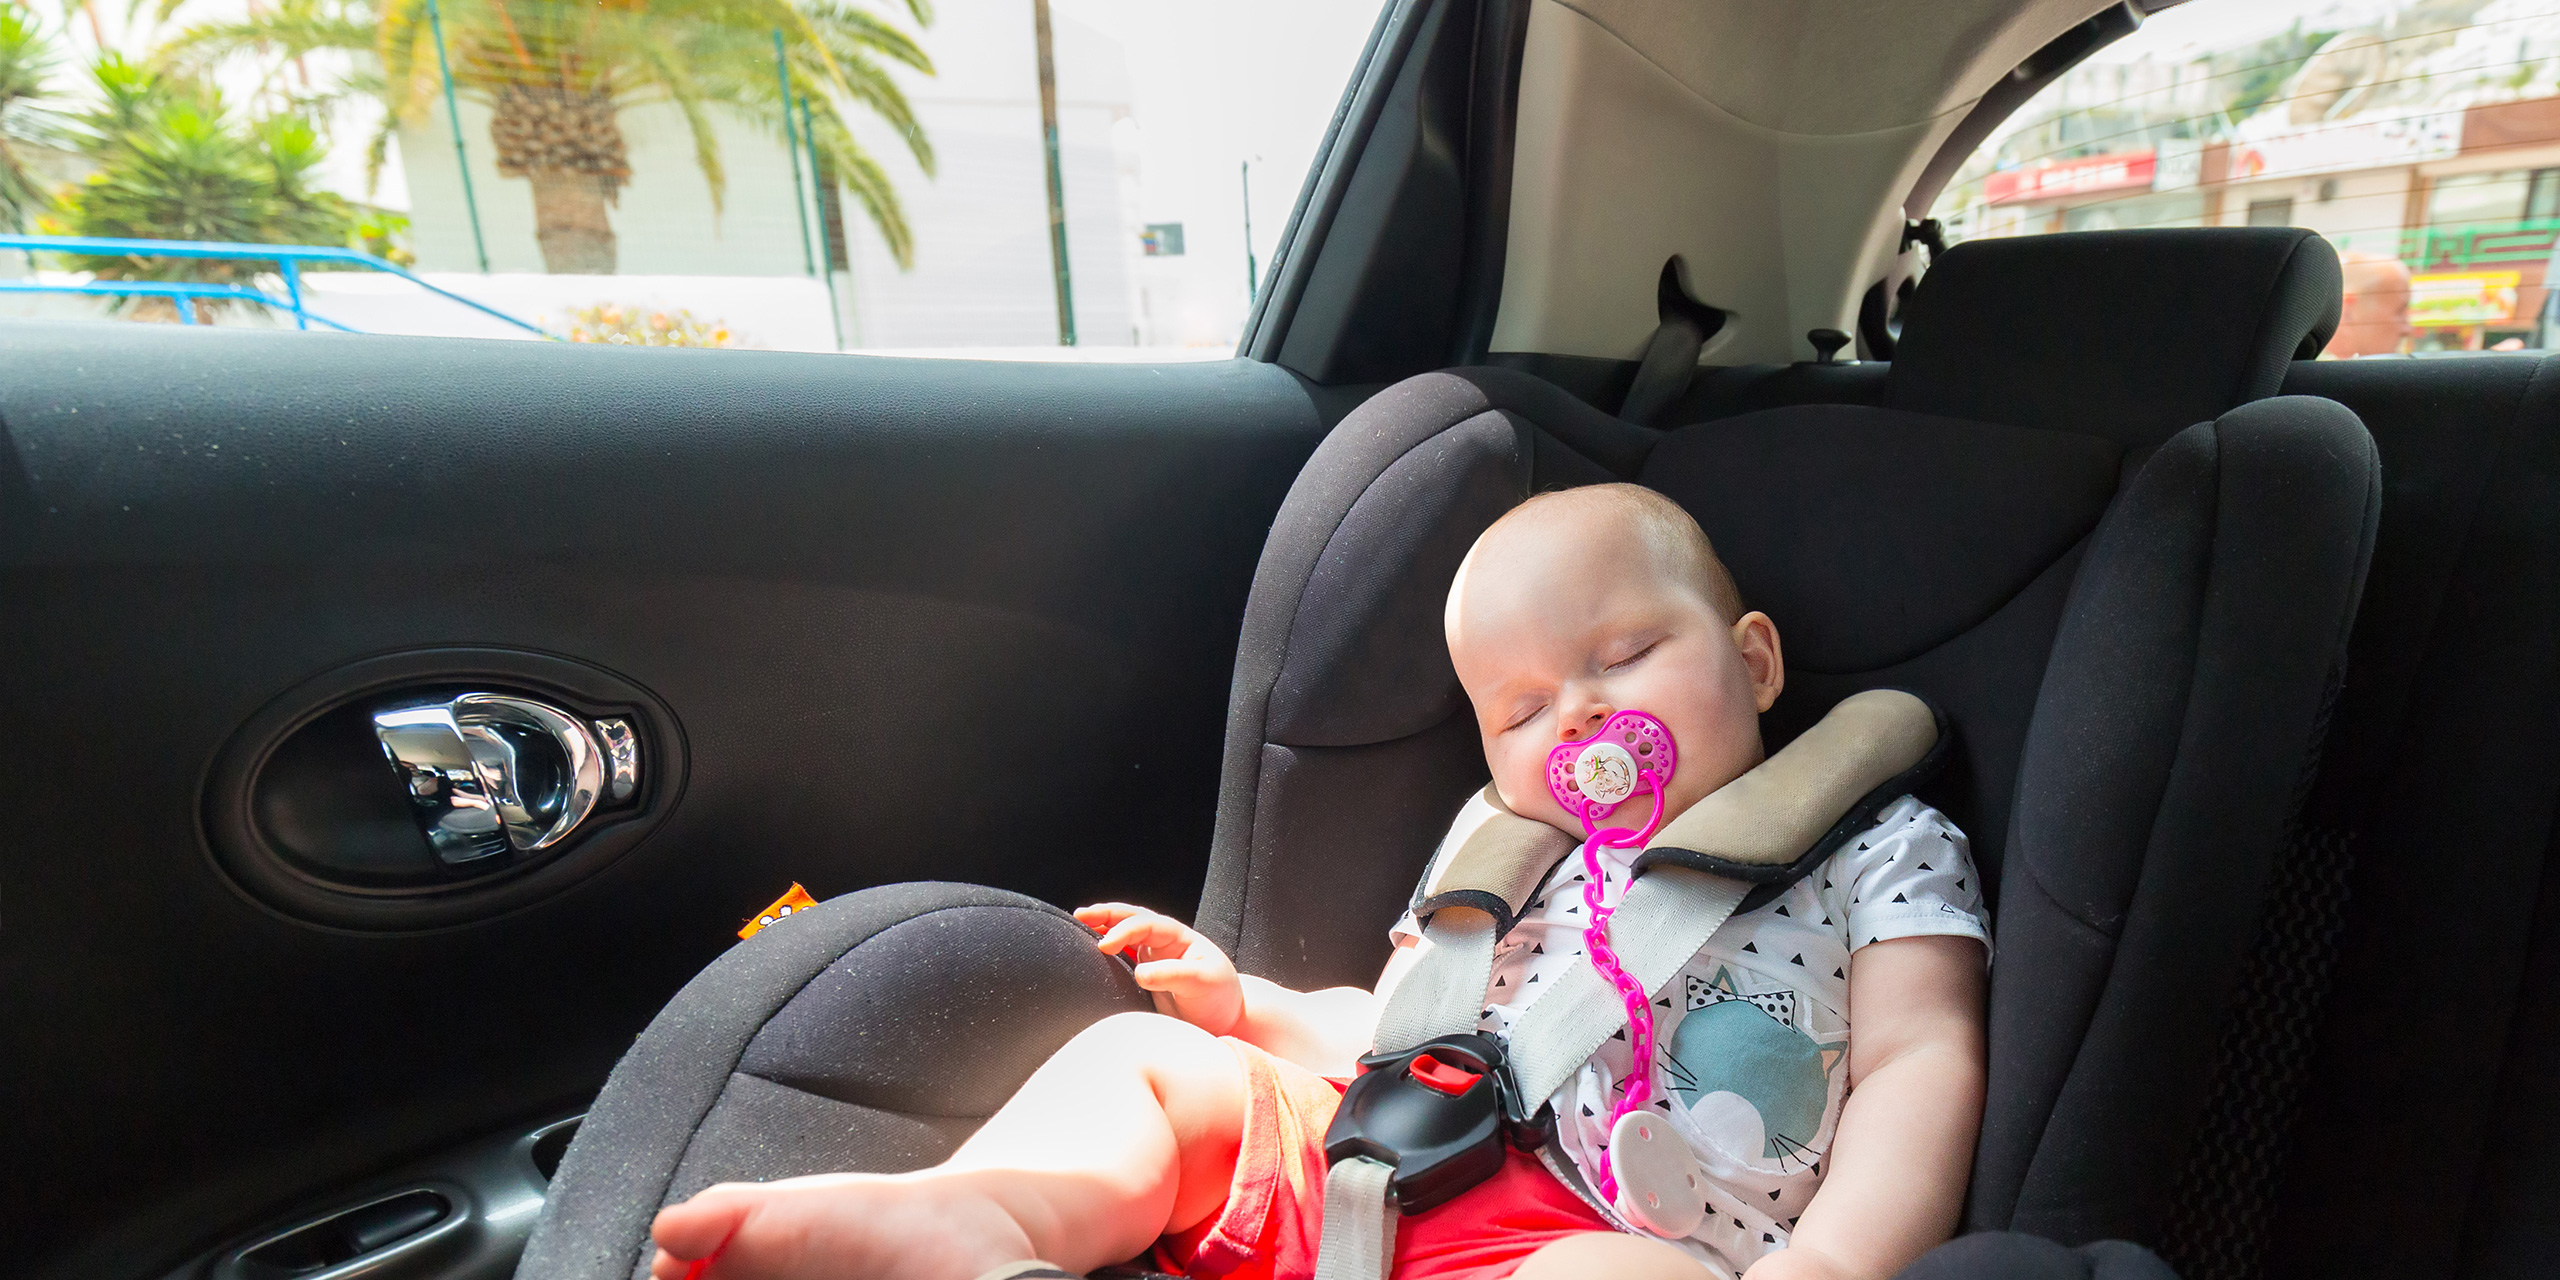 Baby Takes a Road Trip - The New York Times